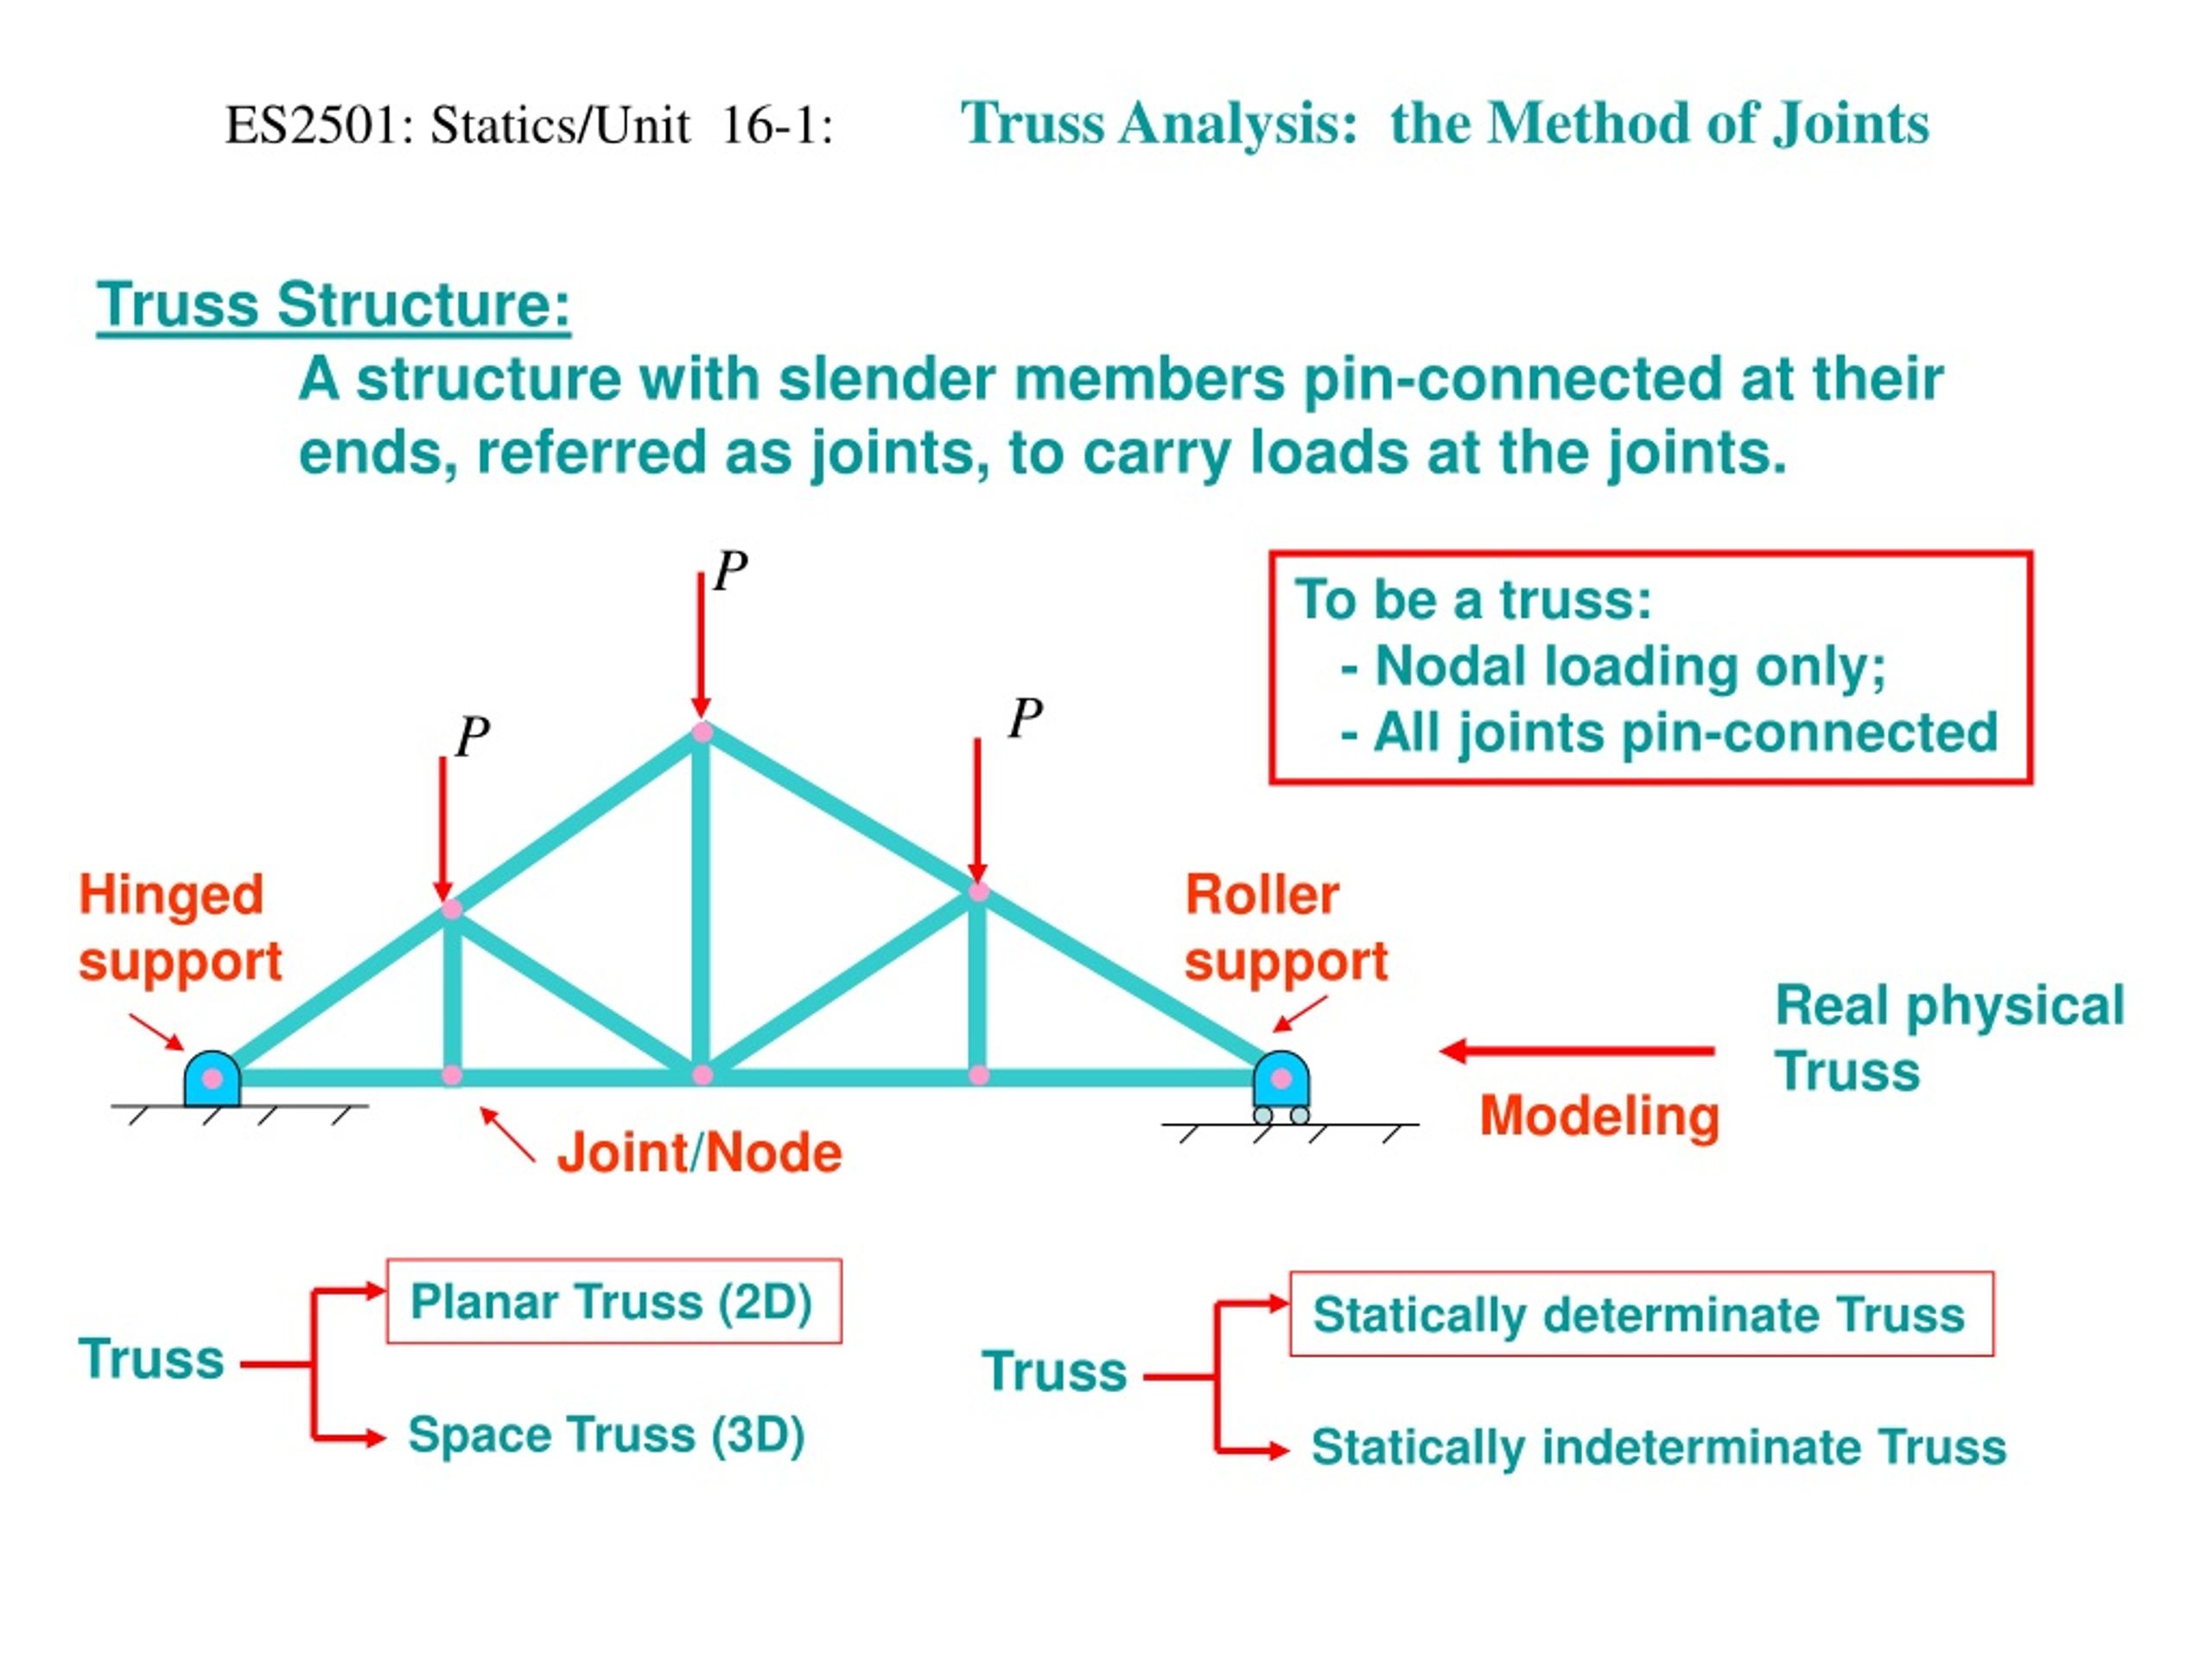 Ppt Es2501 Statics Unit 16 1 Truss Analysis The Method Of Joints